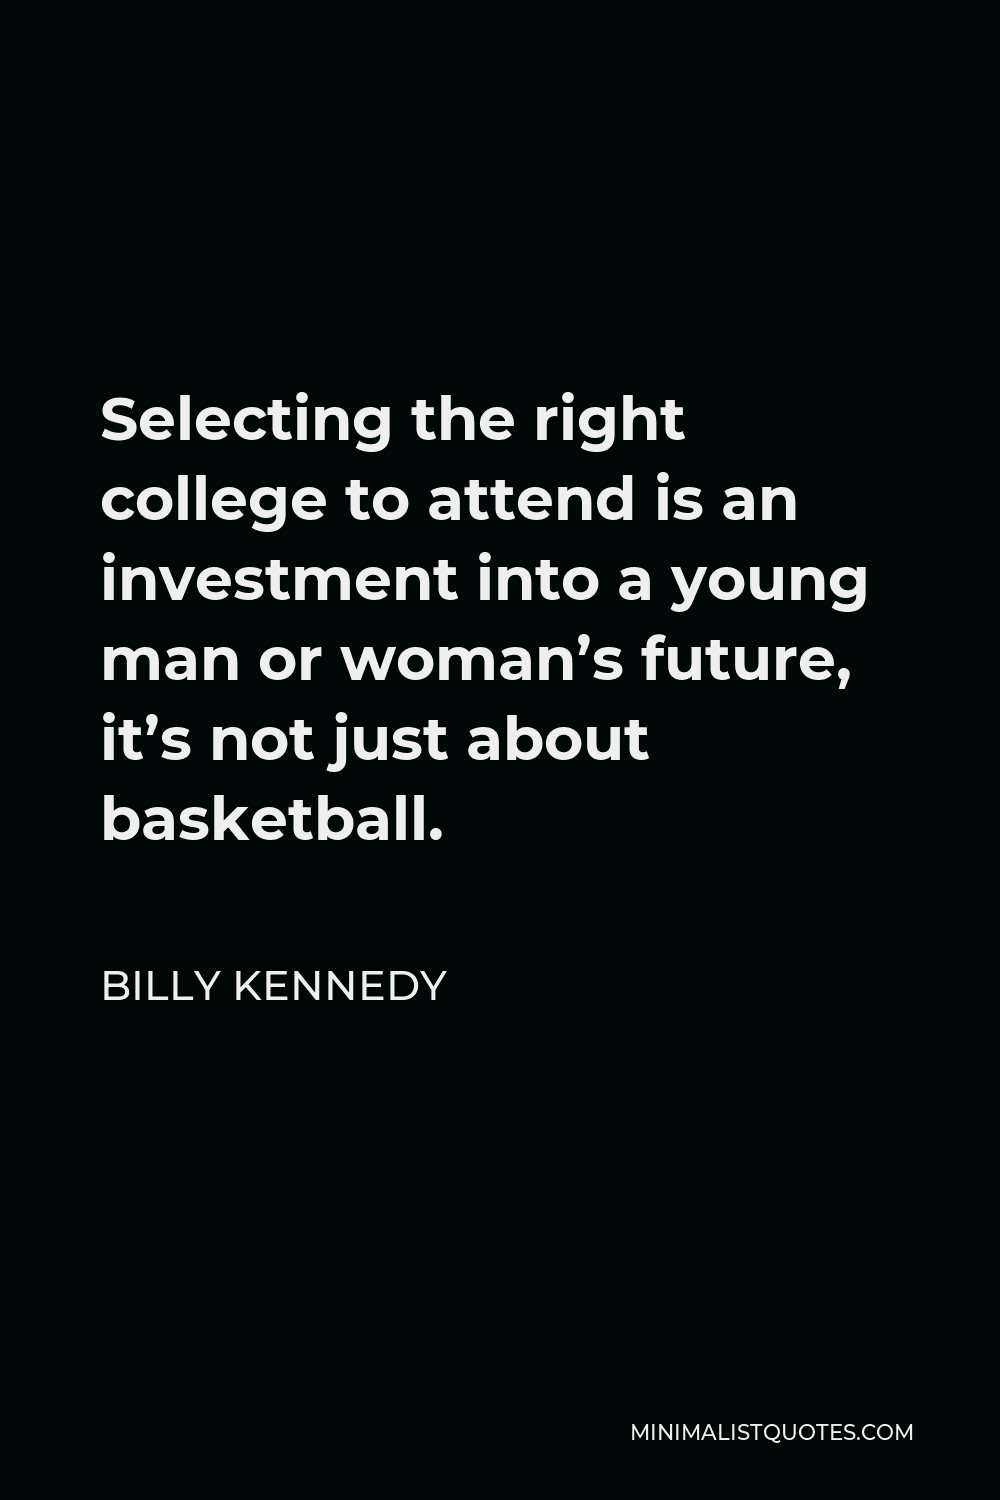 Billy Kennedy Quote - Selecting the right college to attend is an investment into a young man or woman’s future, it’s not just about basketball.